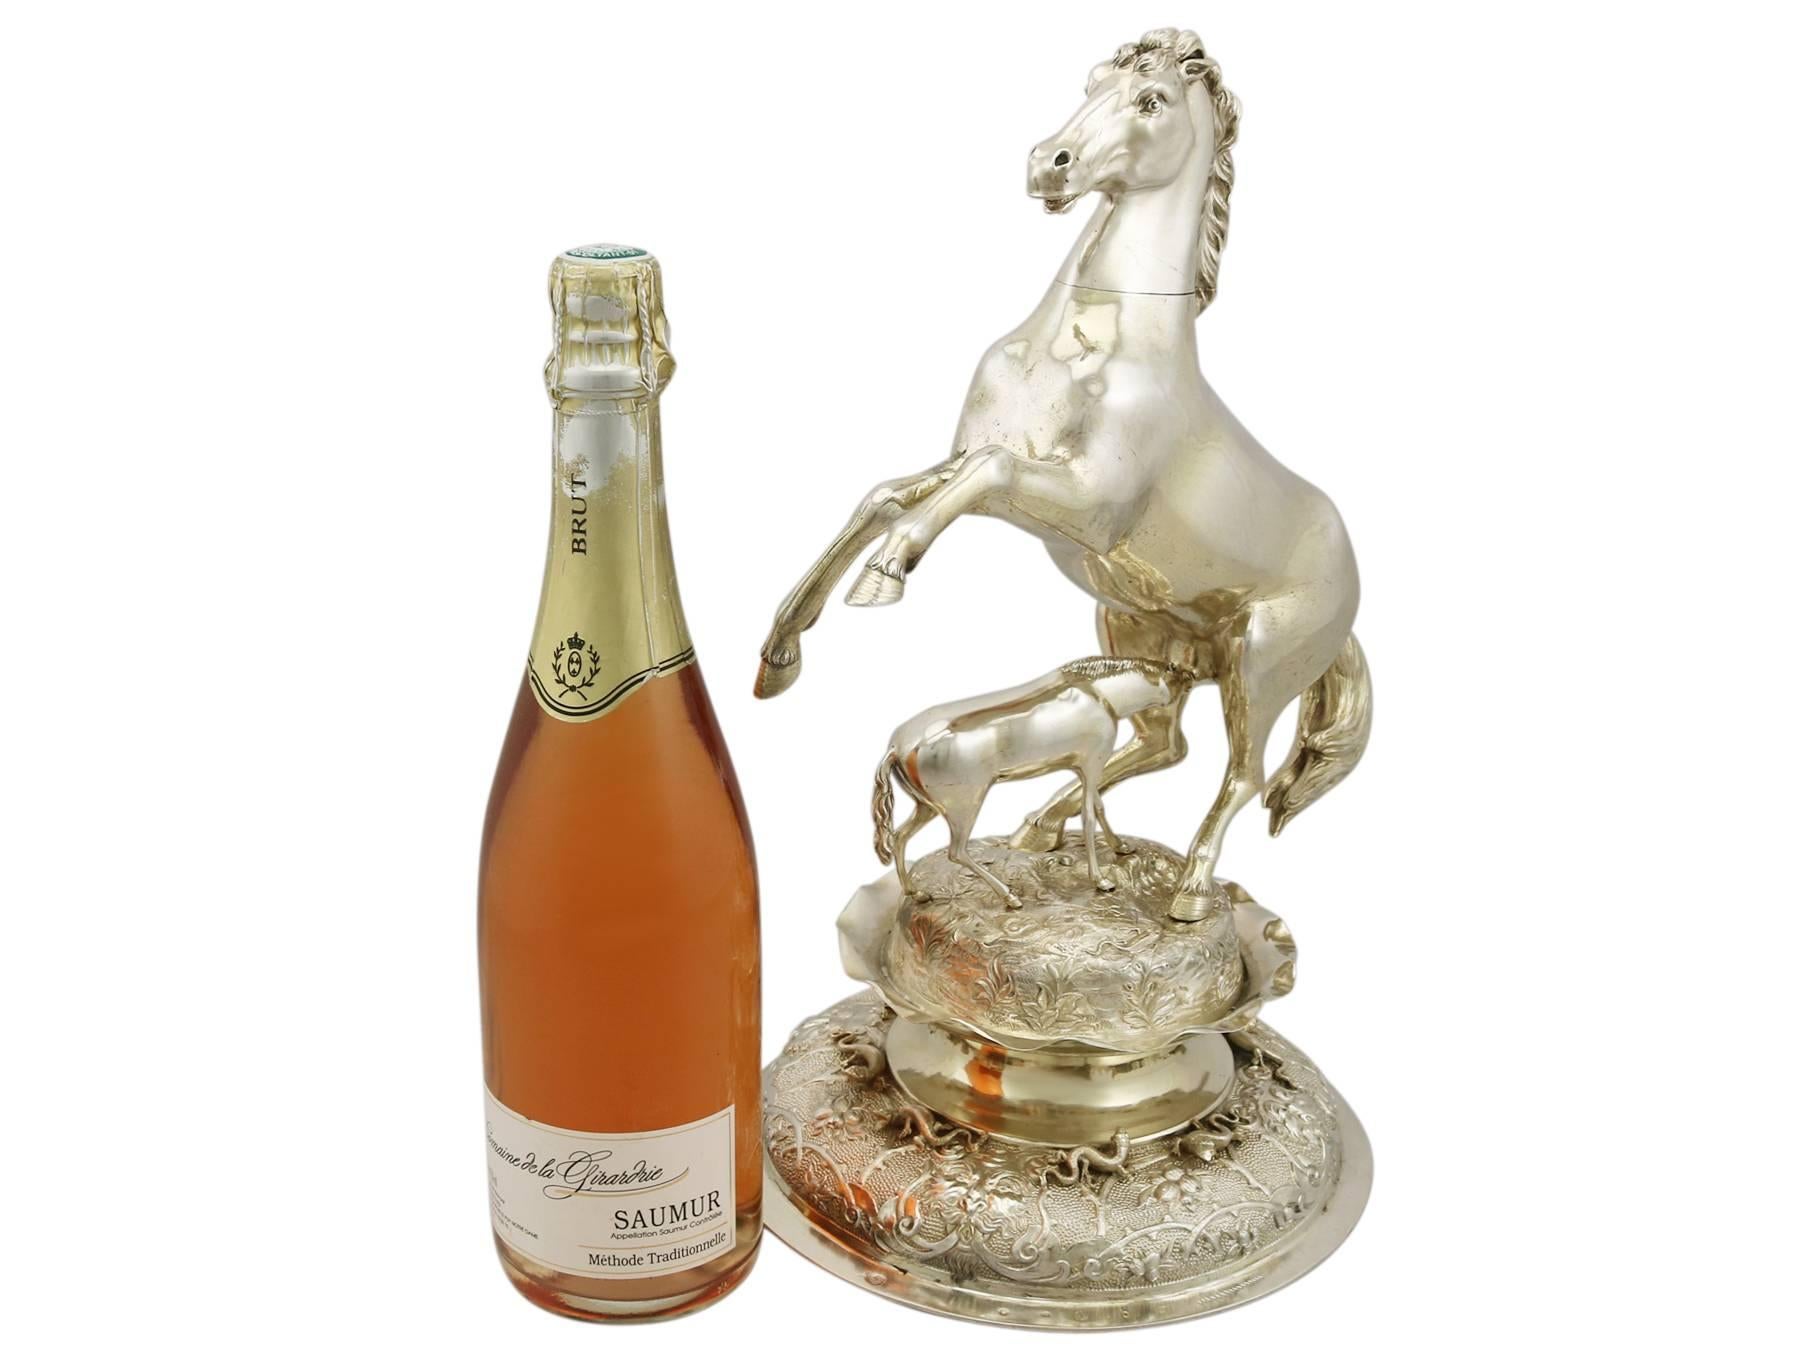 A magnificent, fine and impressive antique German silver table ornament / centrepiece modelled in the form of two horses; an addition to our ornamental silverware collection

This magnificent antique German silver centerpiece has been realistically